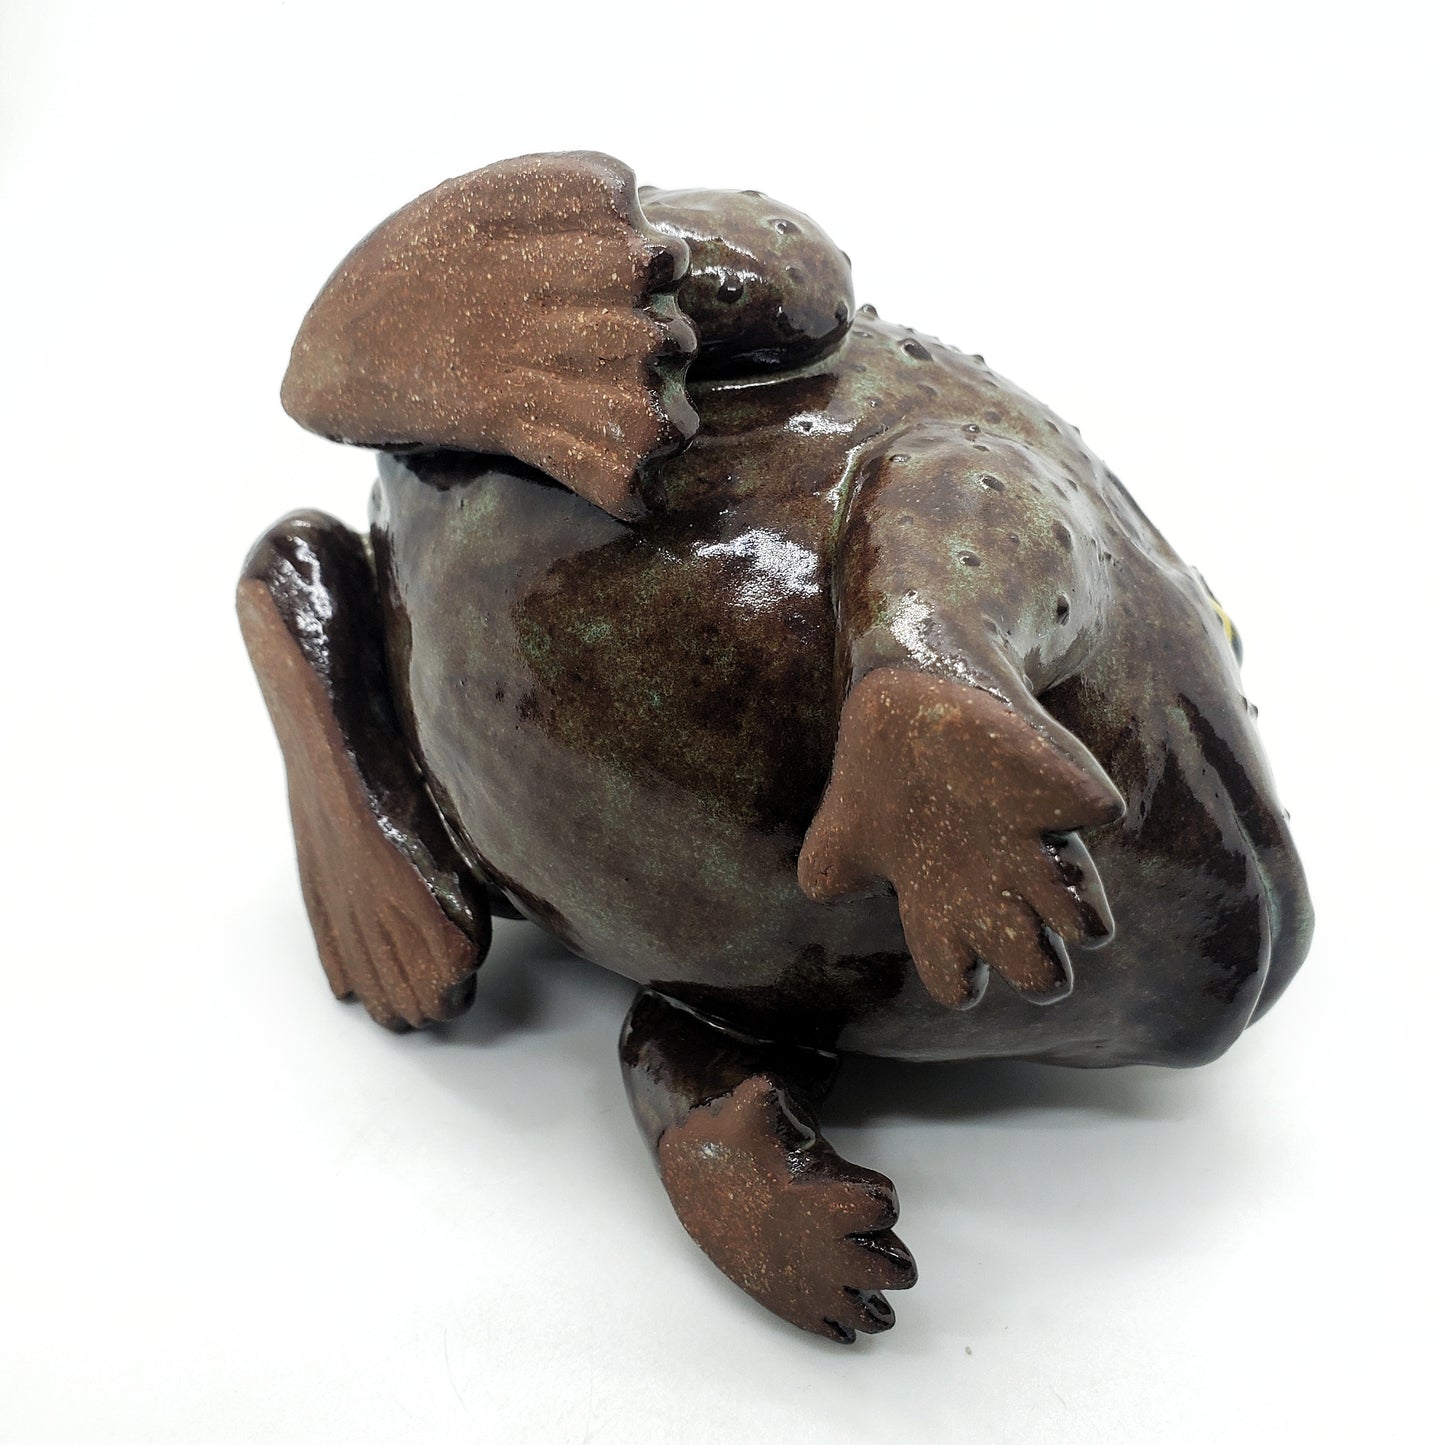 Pipe sculpture - toad king